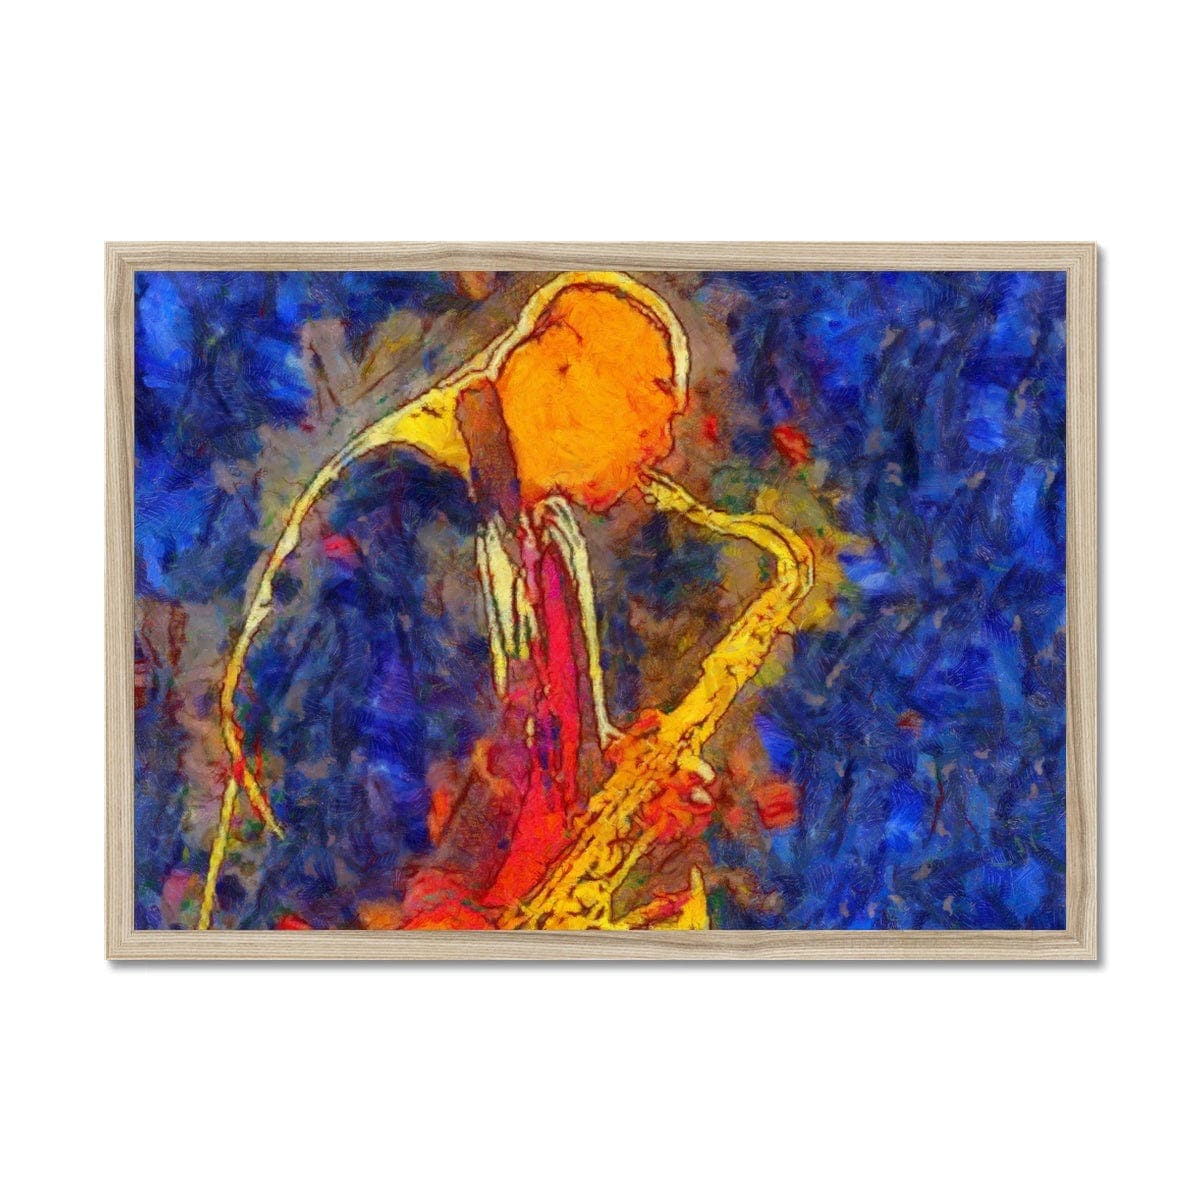 Colorful Sax Player Framed Print